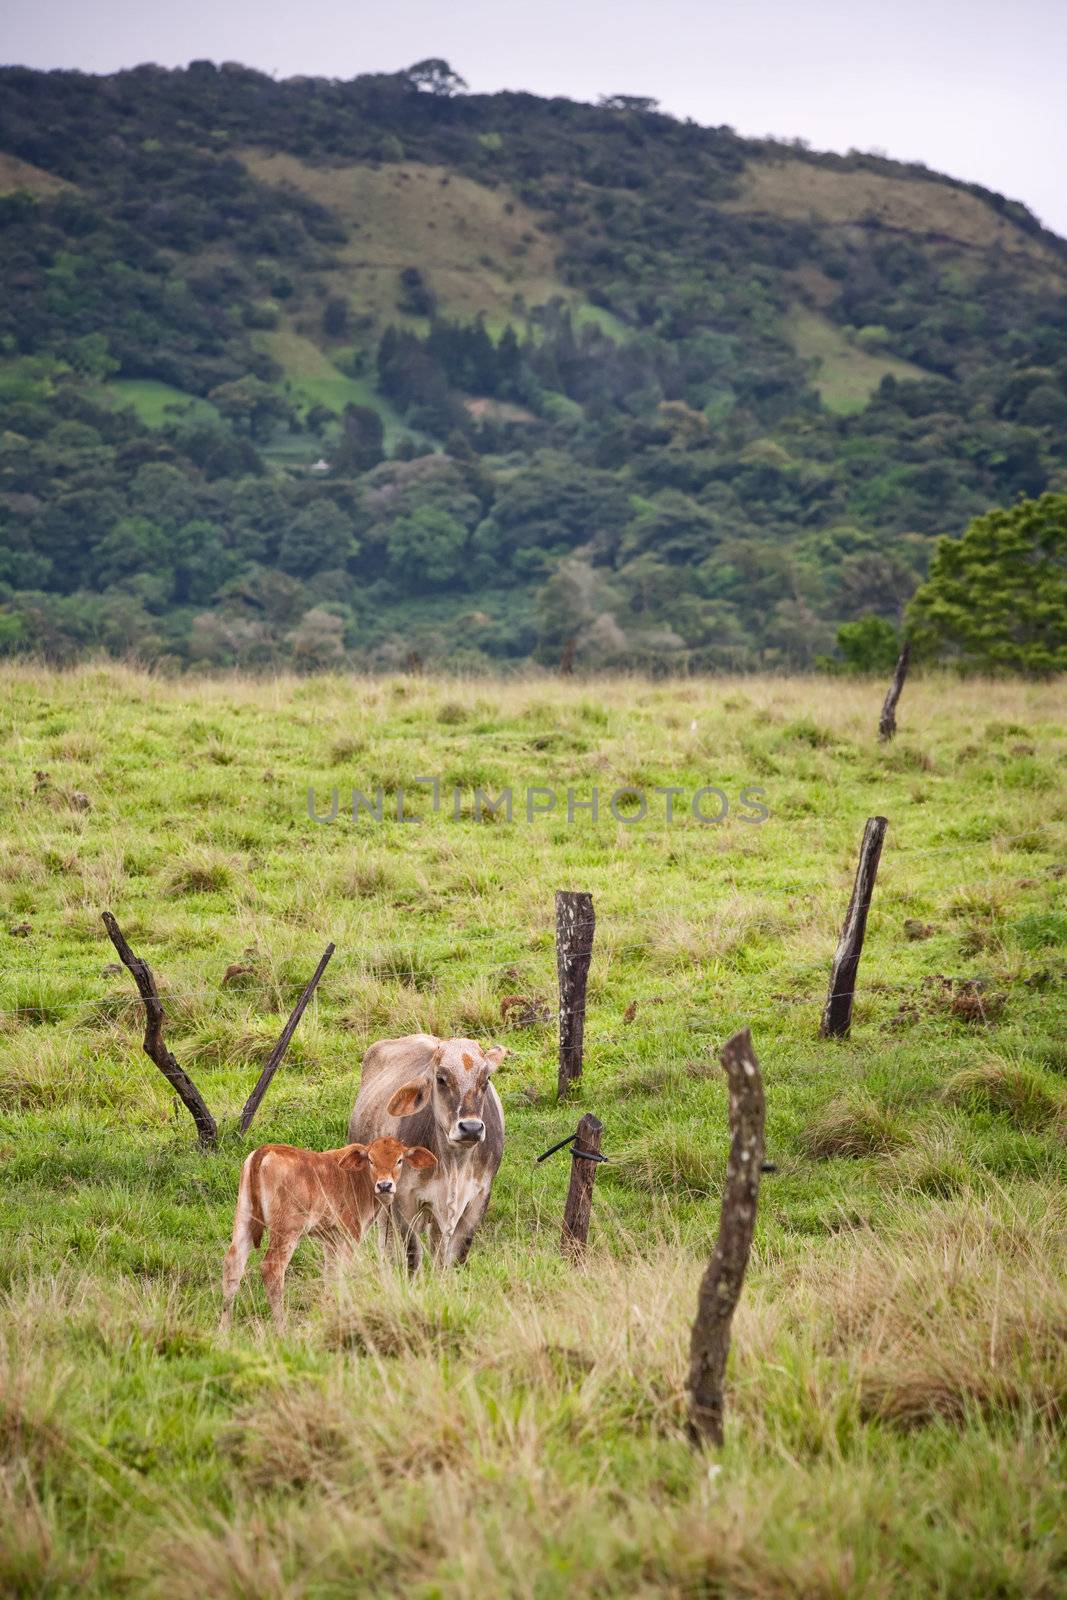 Costa Rican cows by Creatista